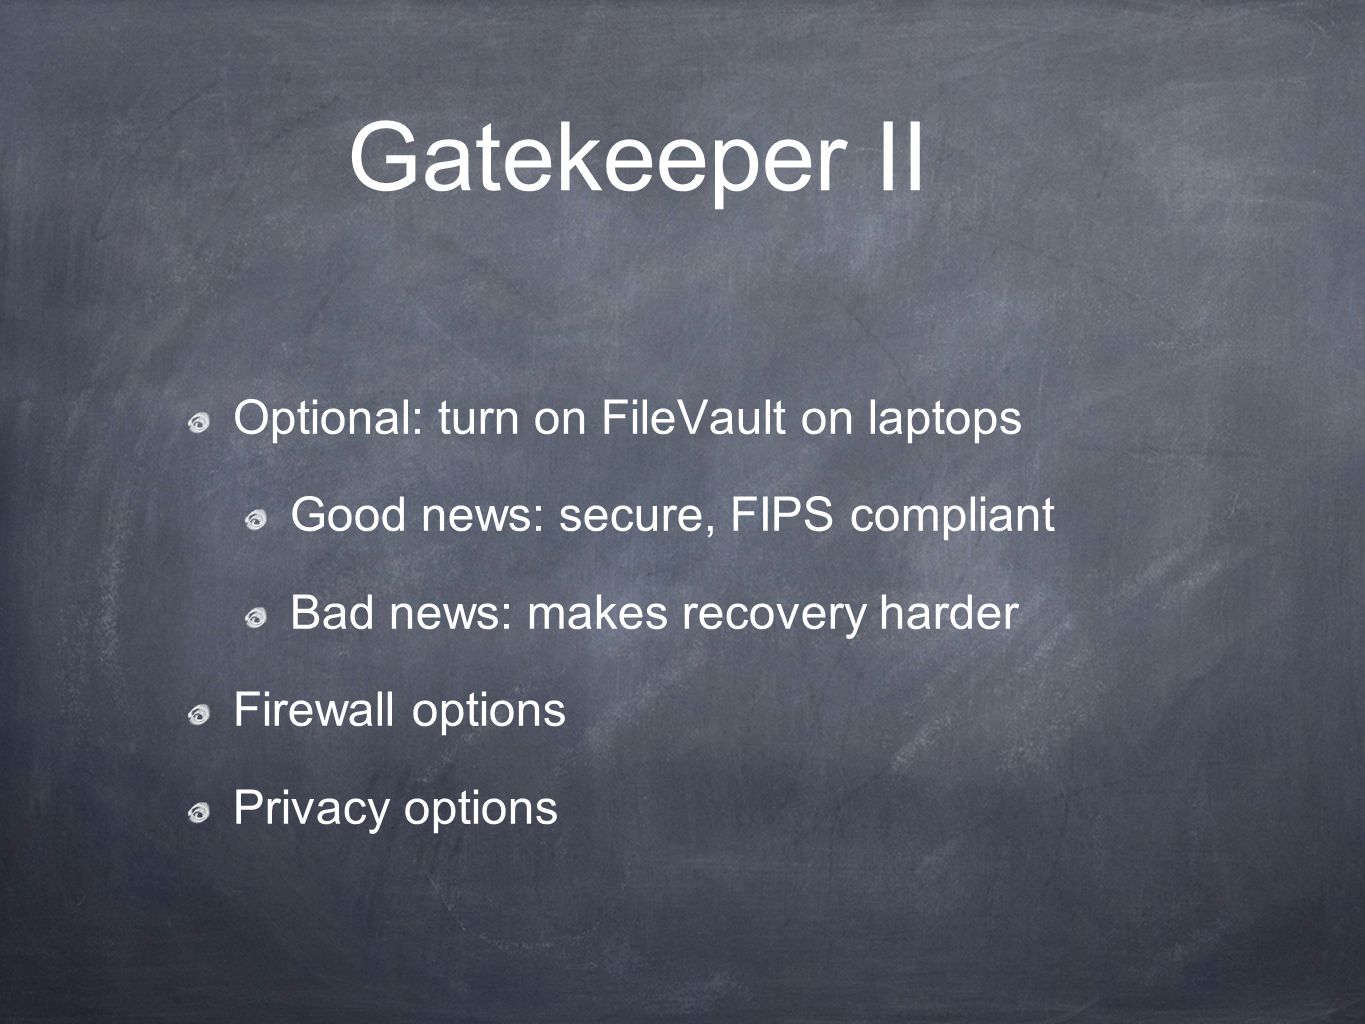 Gatekeeper II Optional: turn on FileVault on laptops Good news: secure, FIPS compliant Bad news: makes recovery harder Firewall options Privacy options